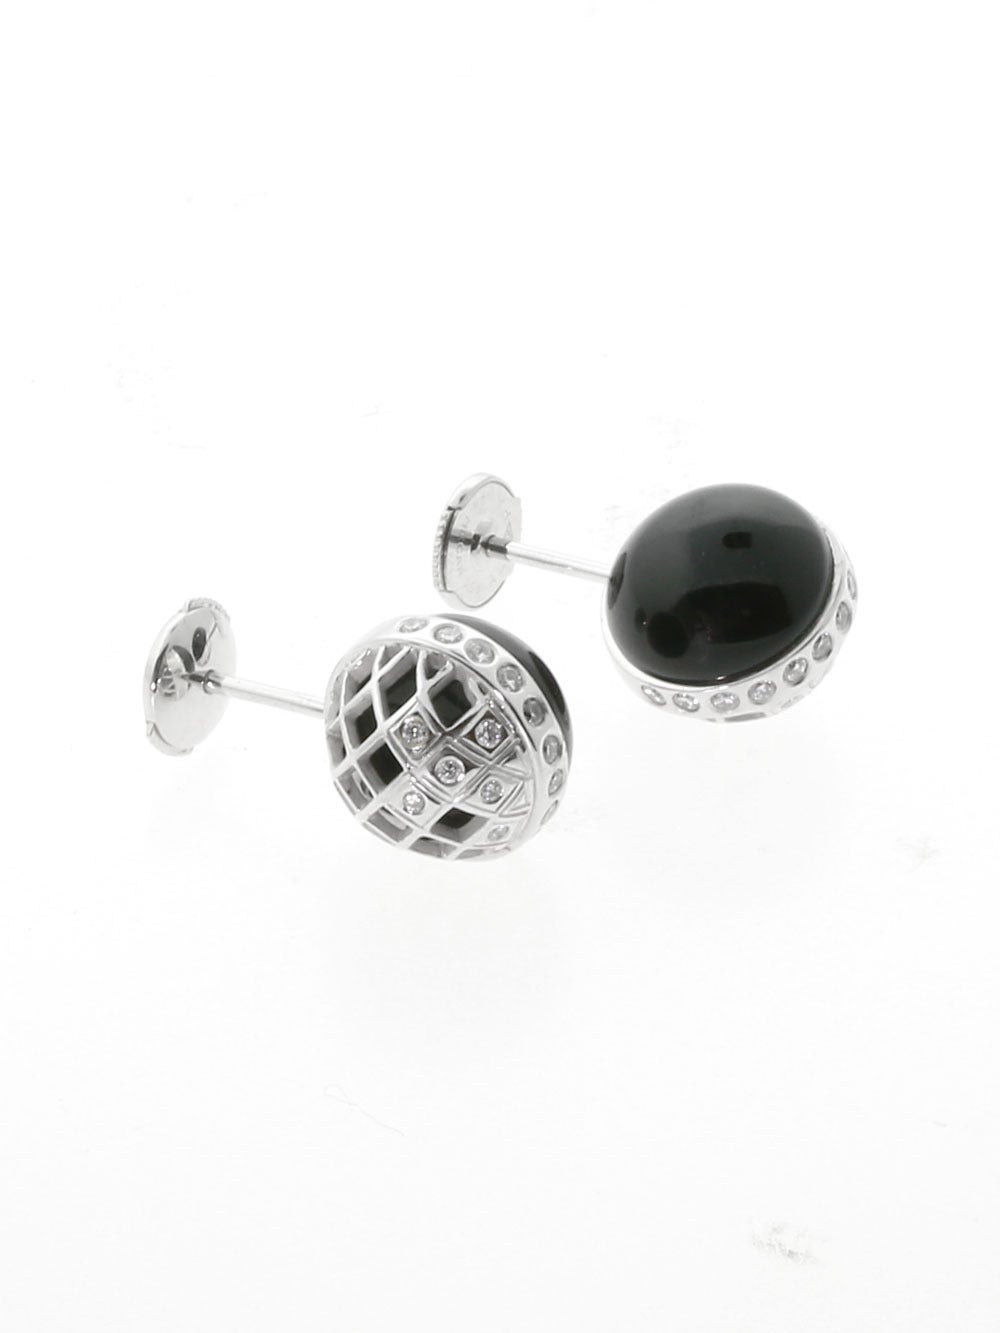 A stunning pair of authentic Carrera y Carrera earrings set with polished onyx, and the finest round brilliant cut diamonds in 18k white gold.

Dimensions: .70″ in diameter

Inventory ID: 0000278

Carrera y Carrera Retail Price: $5,905